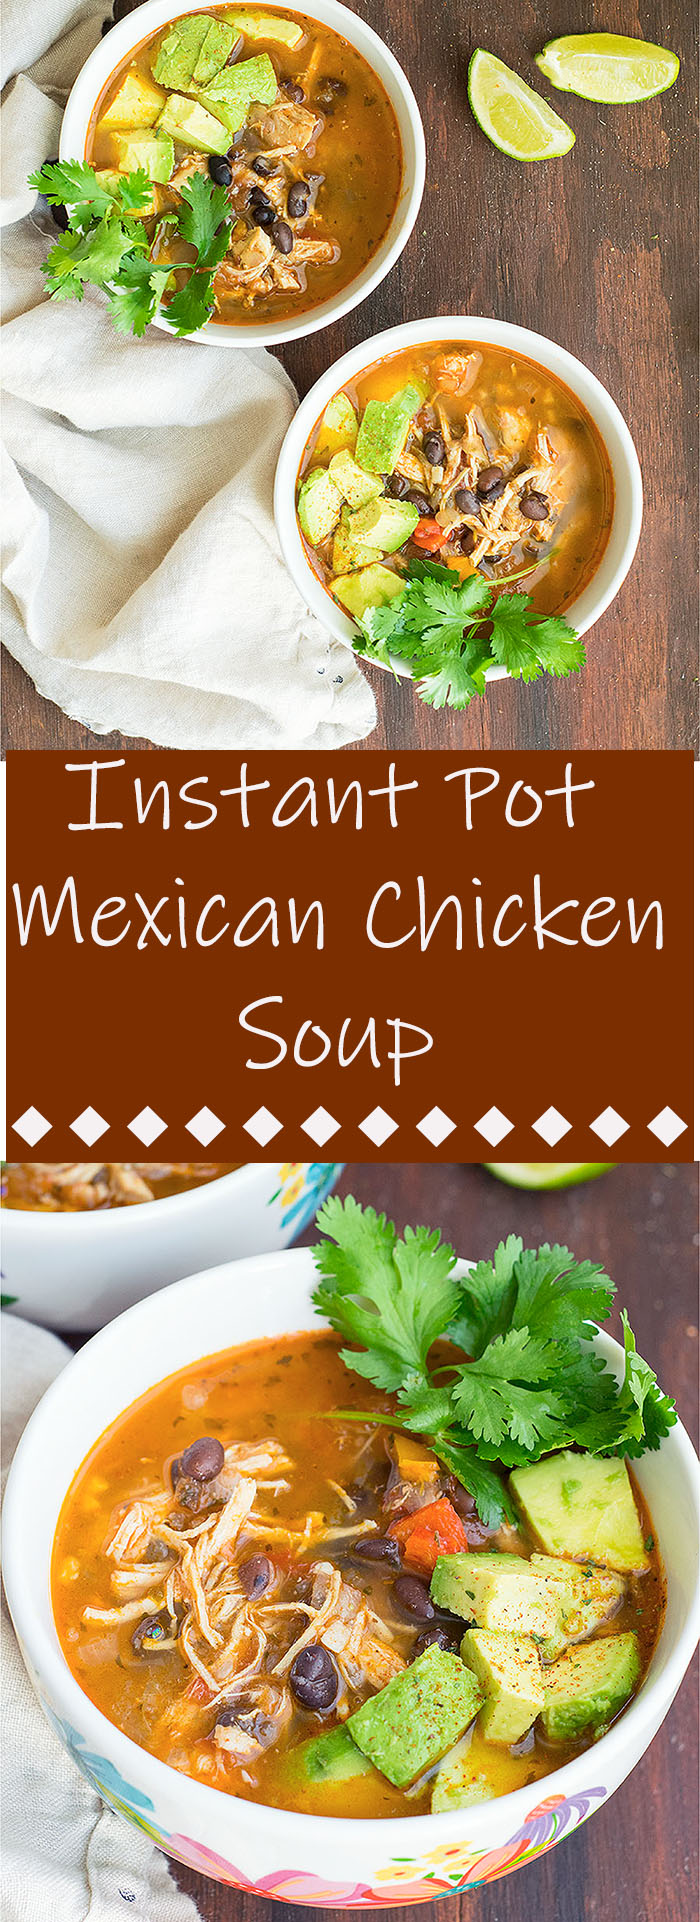 Instant Pot Mexican Chicken Soup - Lets Cook Healthy Tonight